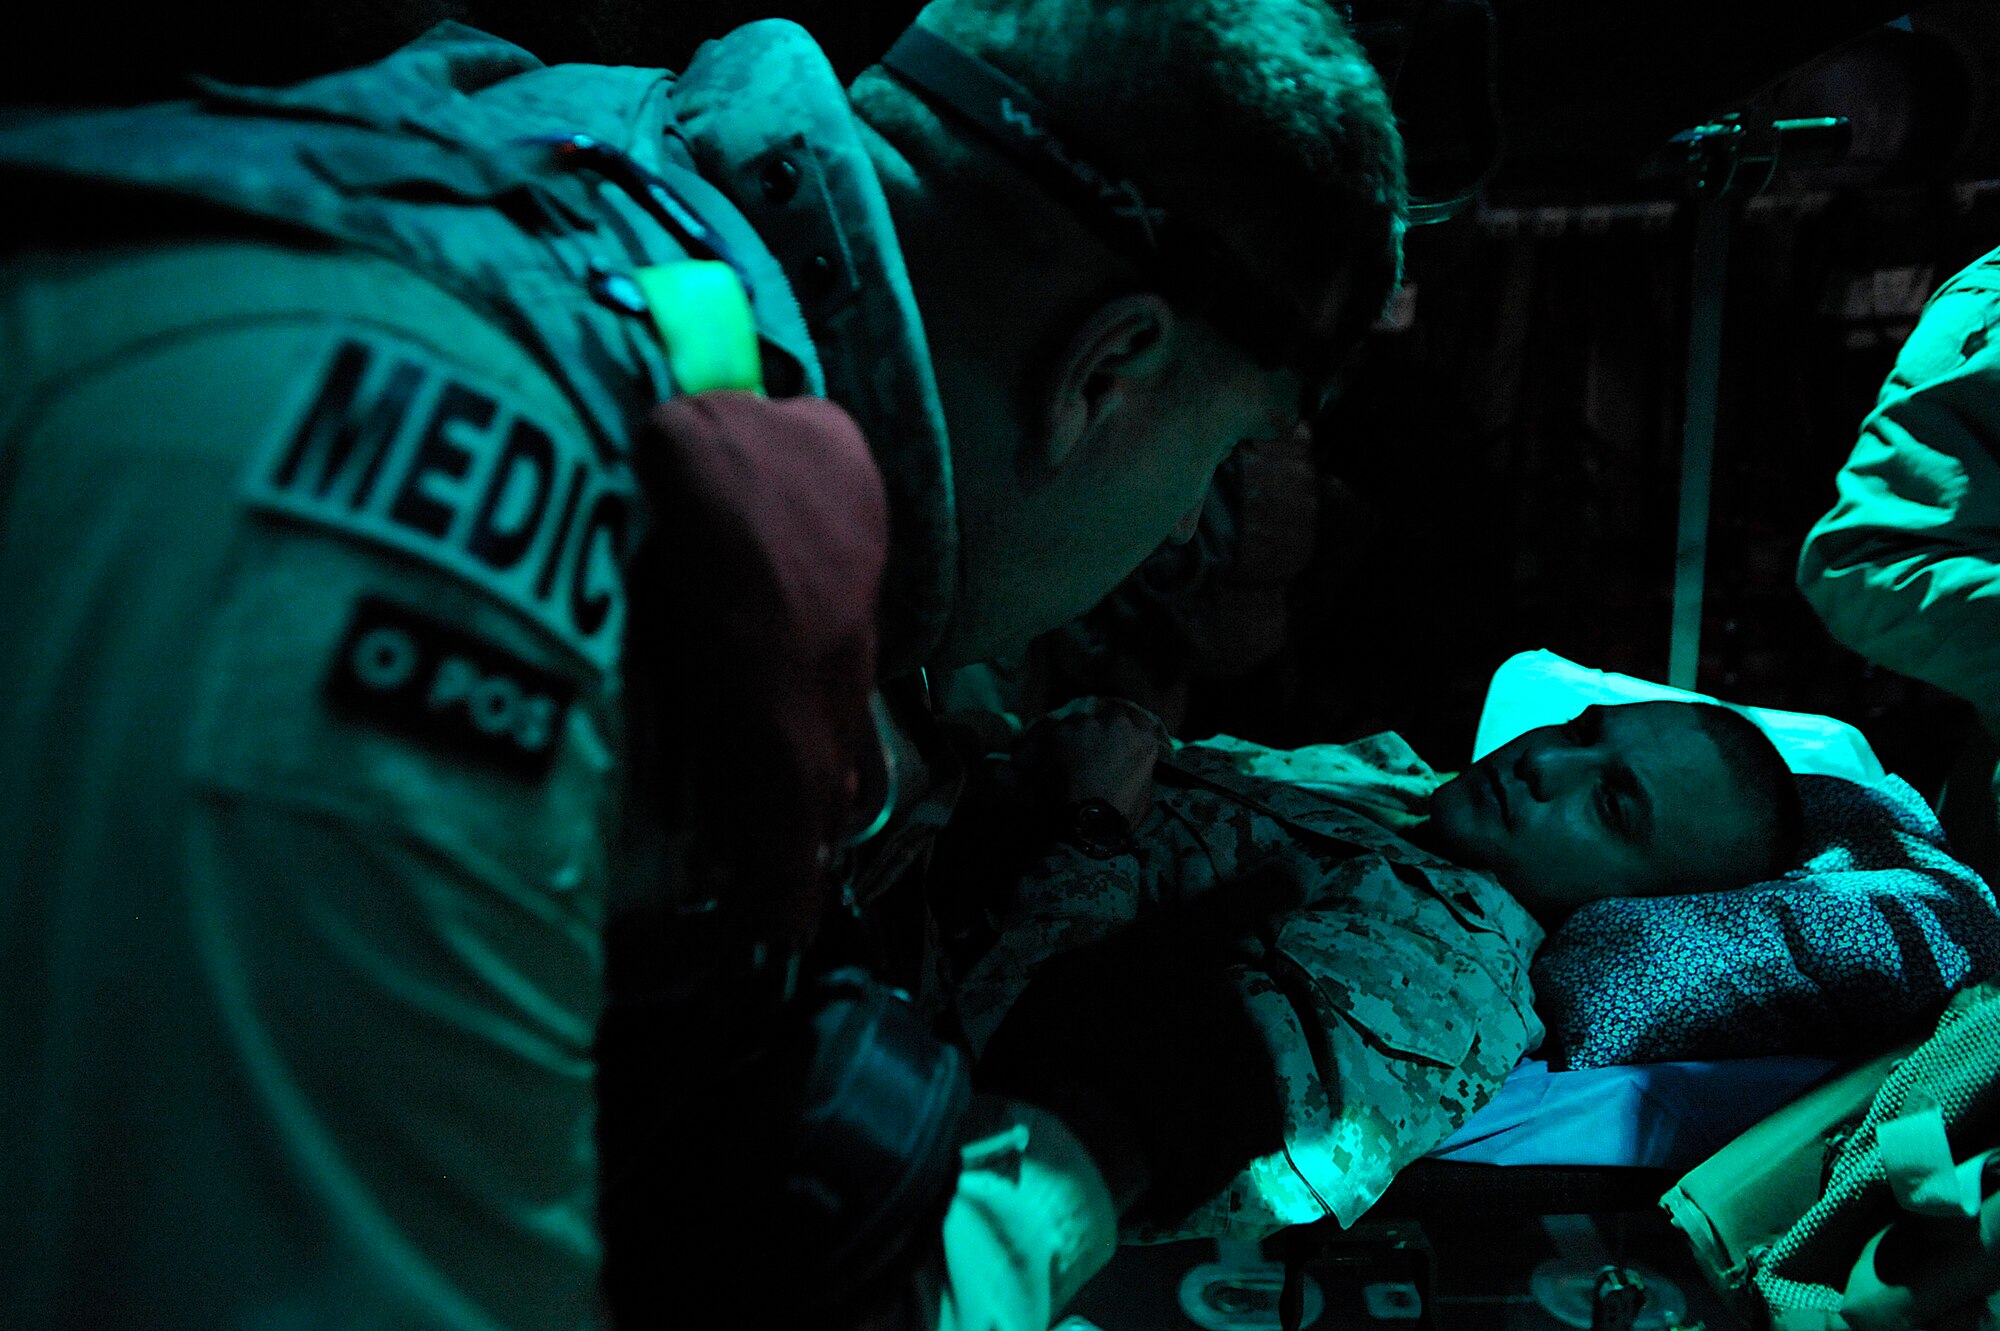 Master Sgt. Scott Wilkes checks on Marine Lance Cpl. Geroge Diaz during an aeromedical evacuation mission over Iraq Nov. 7. Two Iraqi doctors from Iraq's Ministry of Defense accompanied the U.S. Air Force mission to study aeromedical evacuation procedures so that they can establish an aeromedical evacuation service for the Iraqi air force. Wilkes, a charge medical technician with the 332nd Expeditionary Aeromedical Evacuation Flight, is deployed from McGuire Air Force Base, N.J. (U.S. Air Force photo/Airman 1st Class Jason Epley)